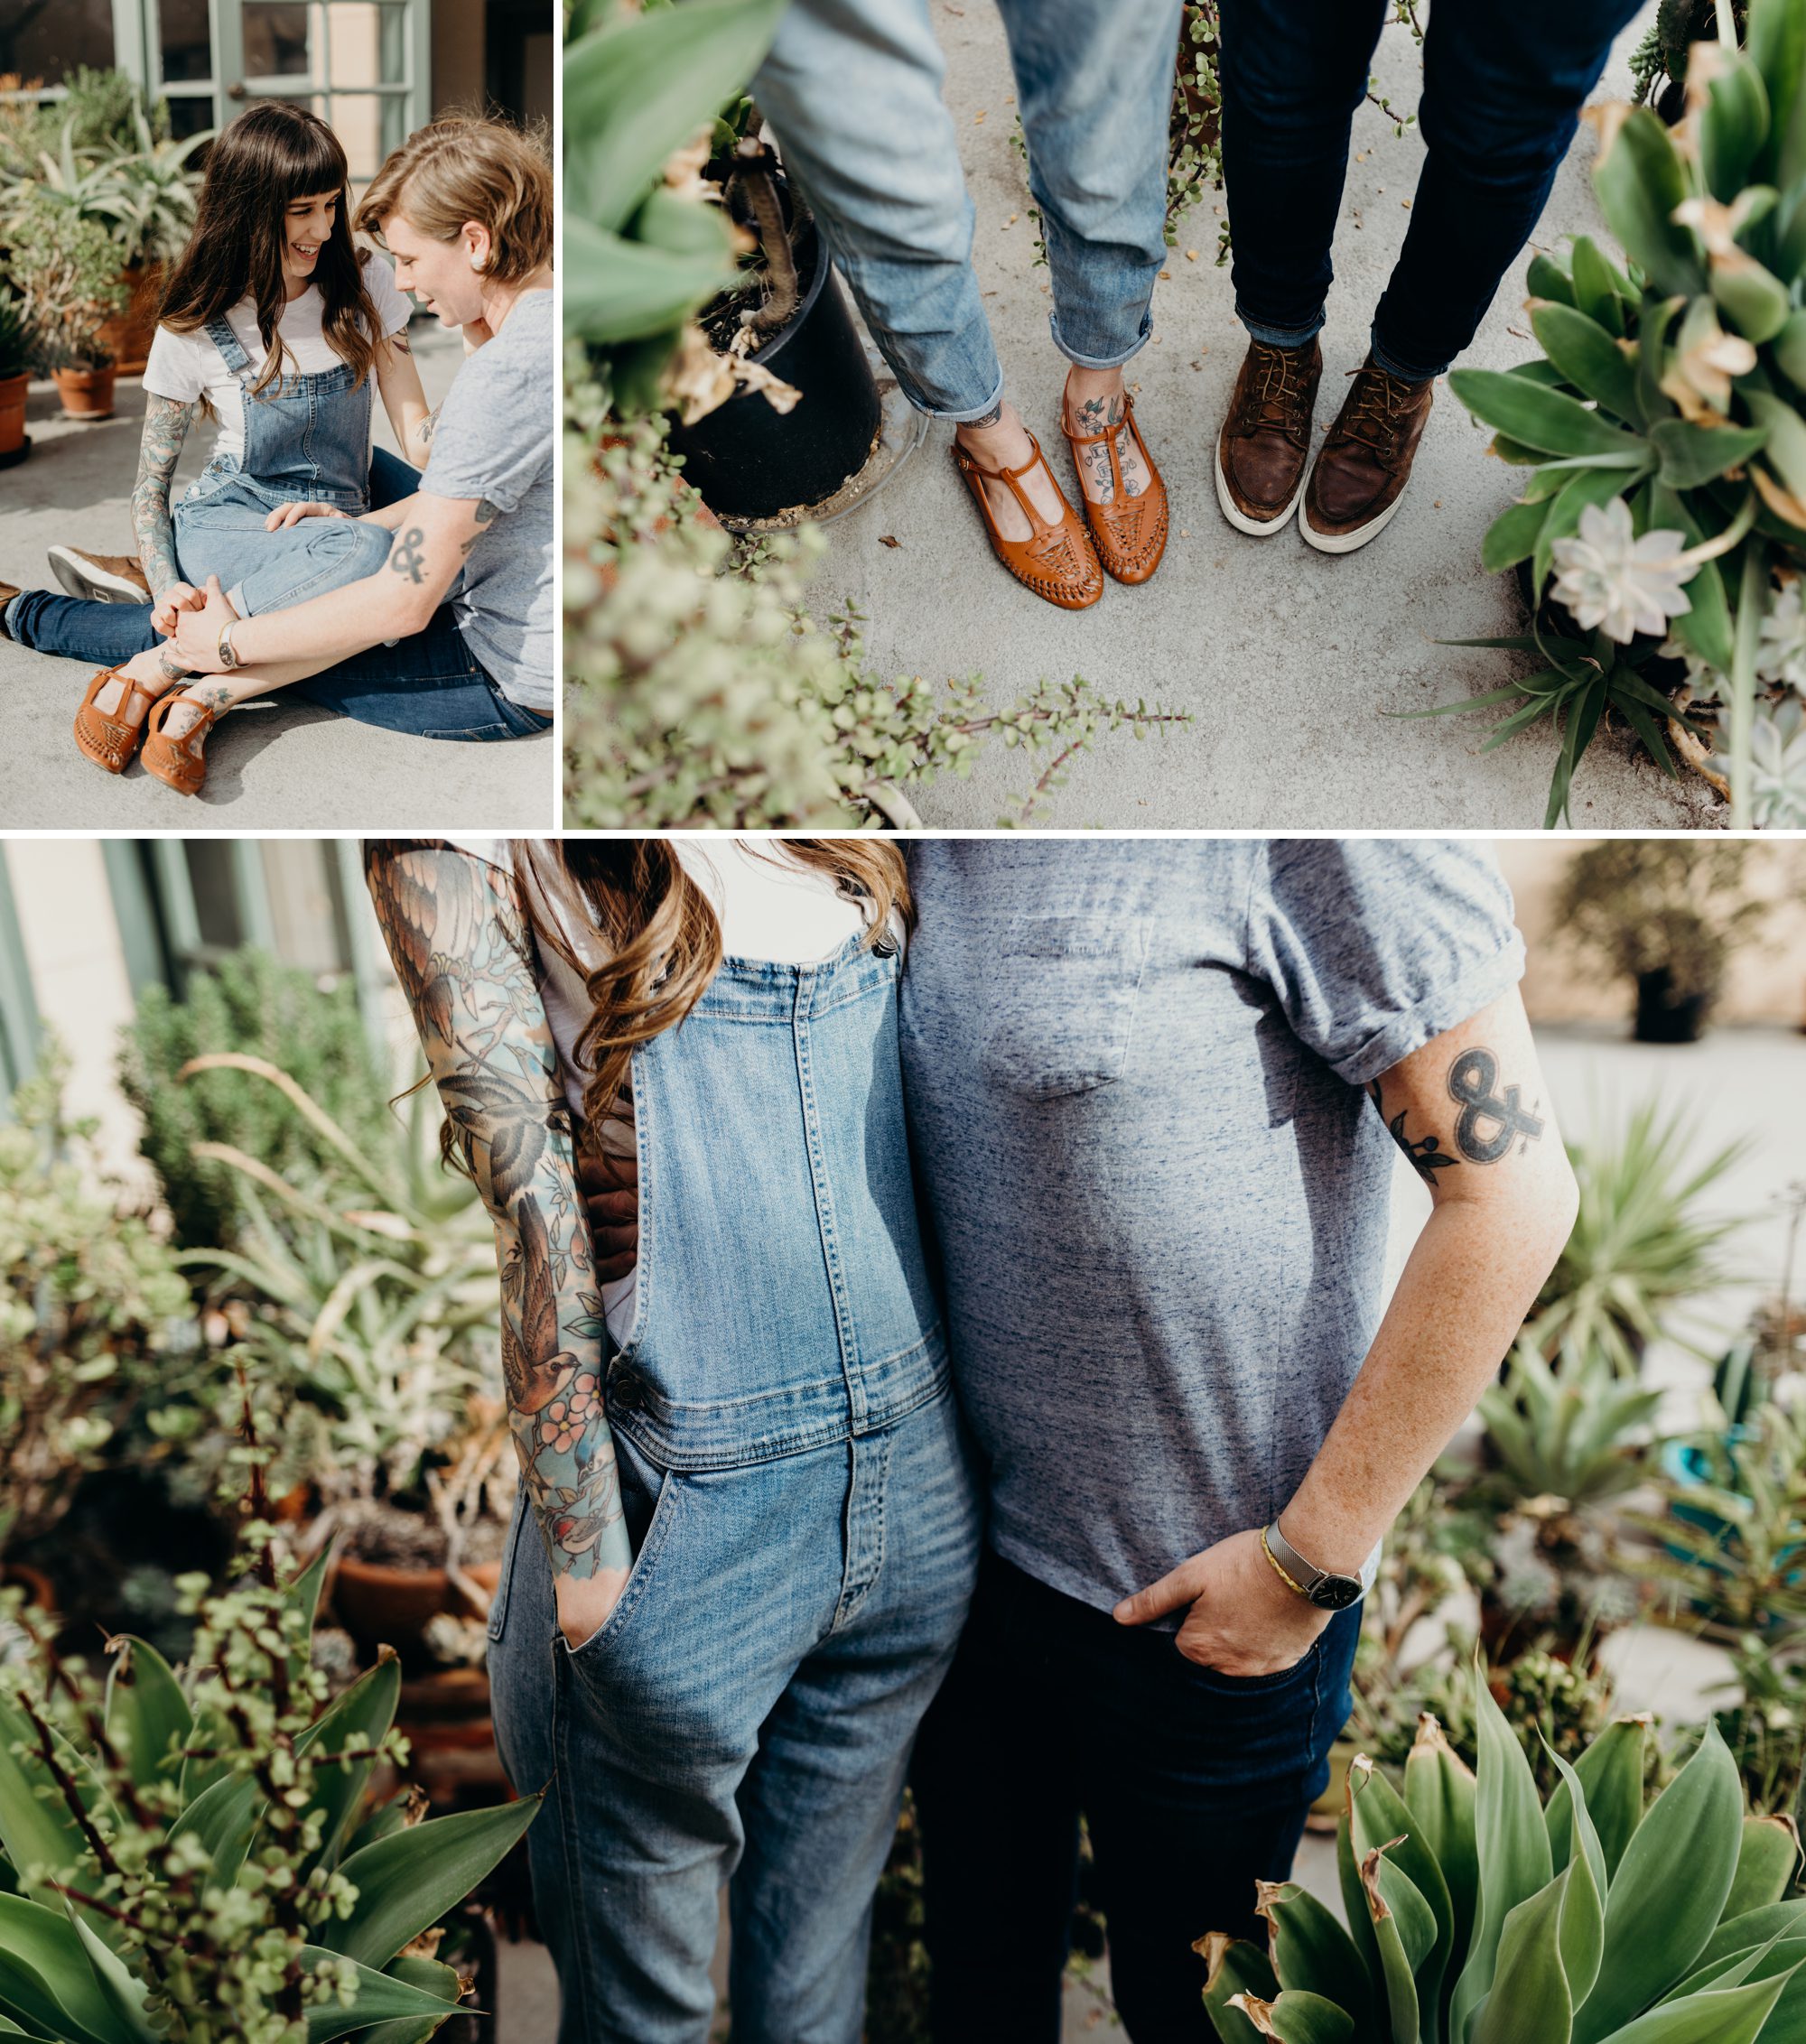 Dreamy rooftop garden details during this LGBTQ portrait session. By North Park San Diego engagement photographer Briana Morrison.